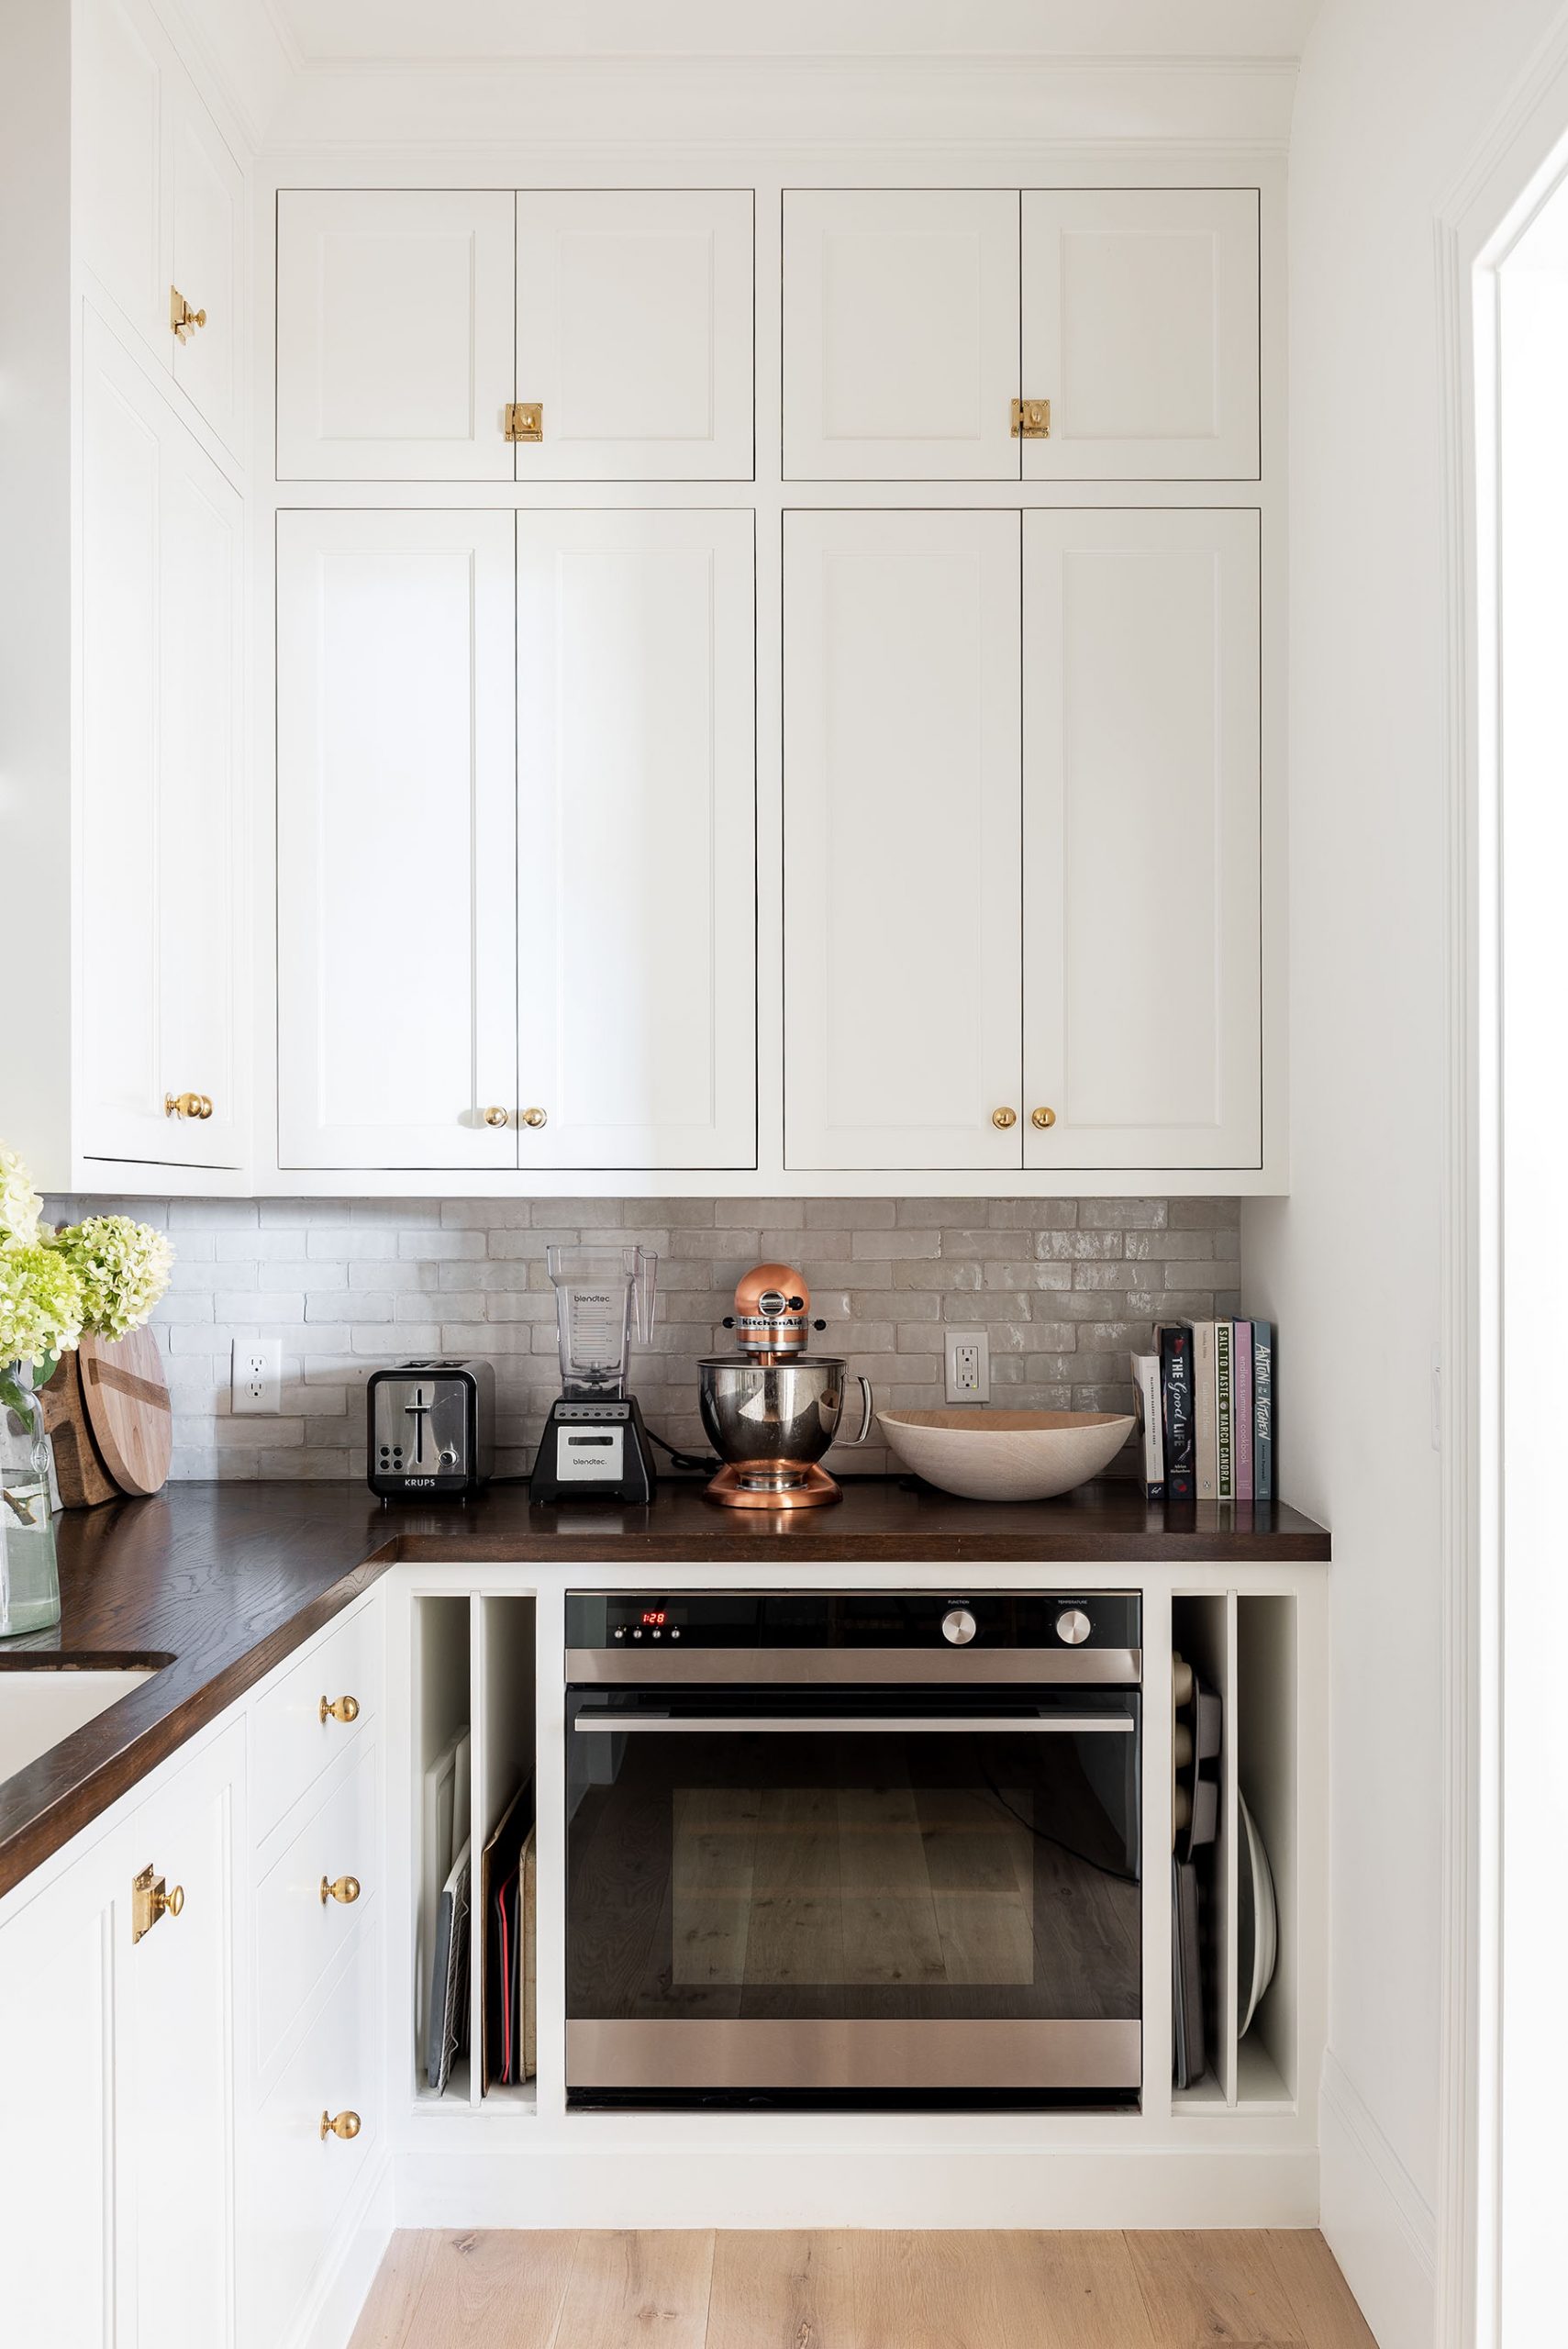 pantry cabinets in mcgee home